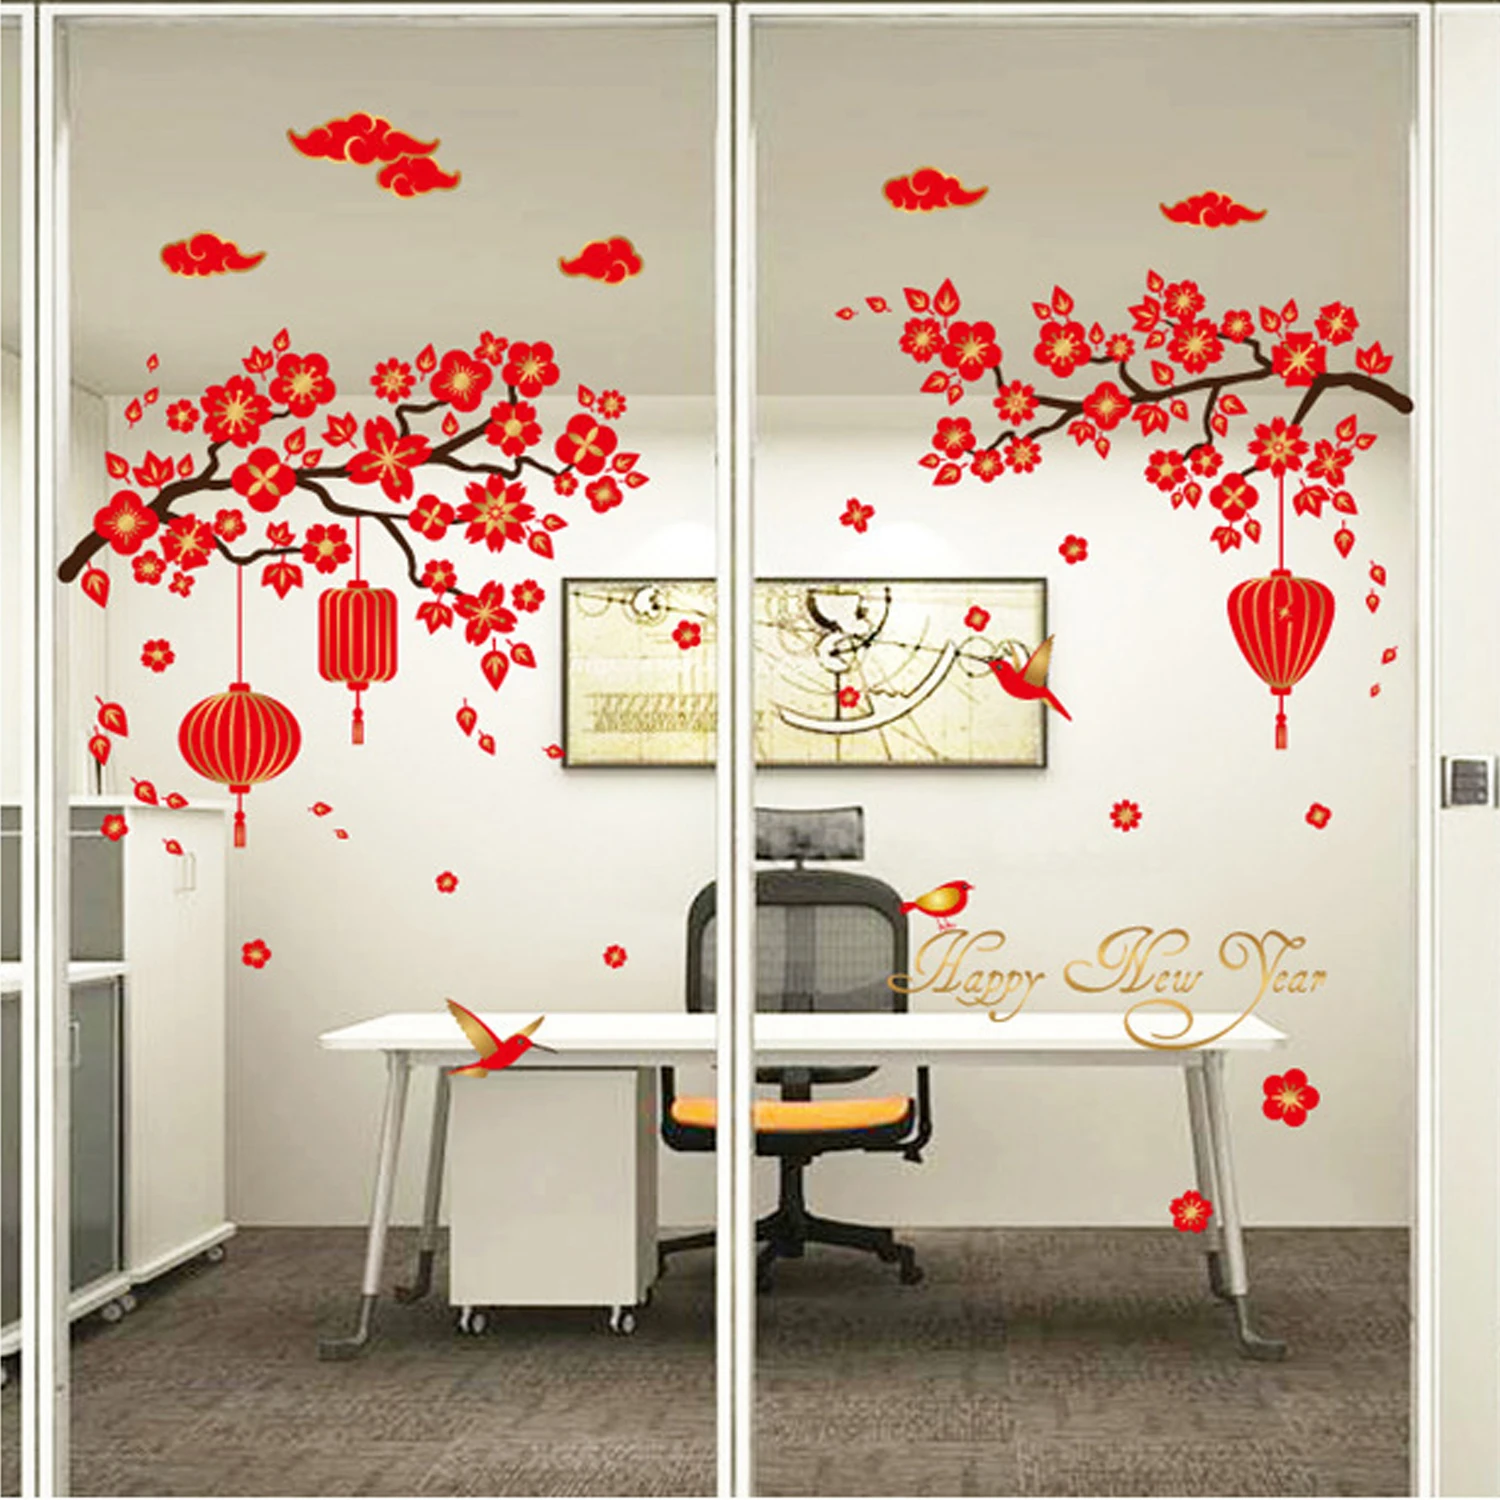 

Behogar DIY Wall Stickers Removable Red Lanterns Lunar New Year Decorative Art Decals Wallpaper for Home Living Room Decors